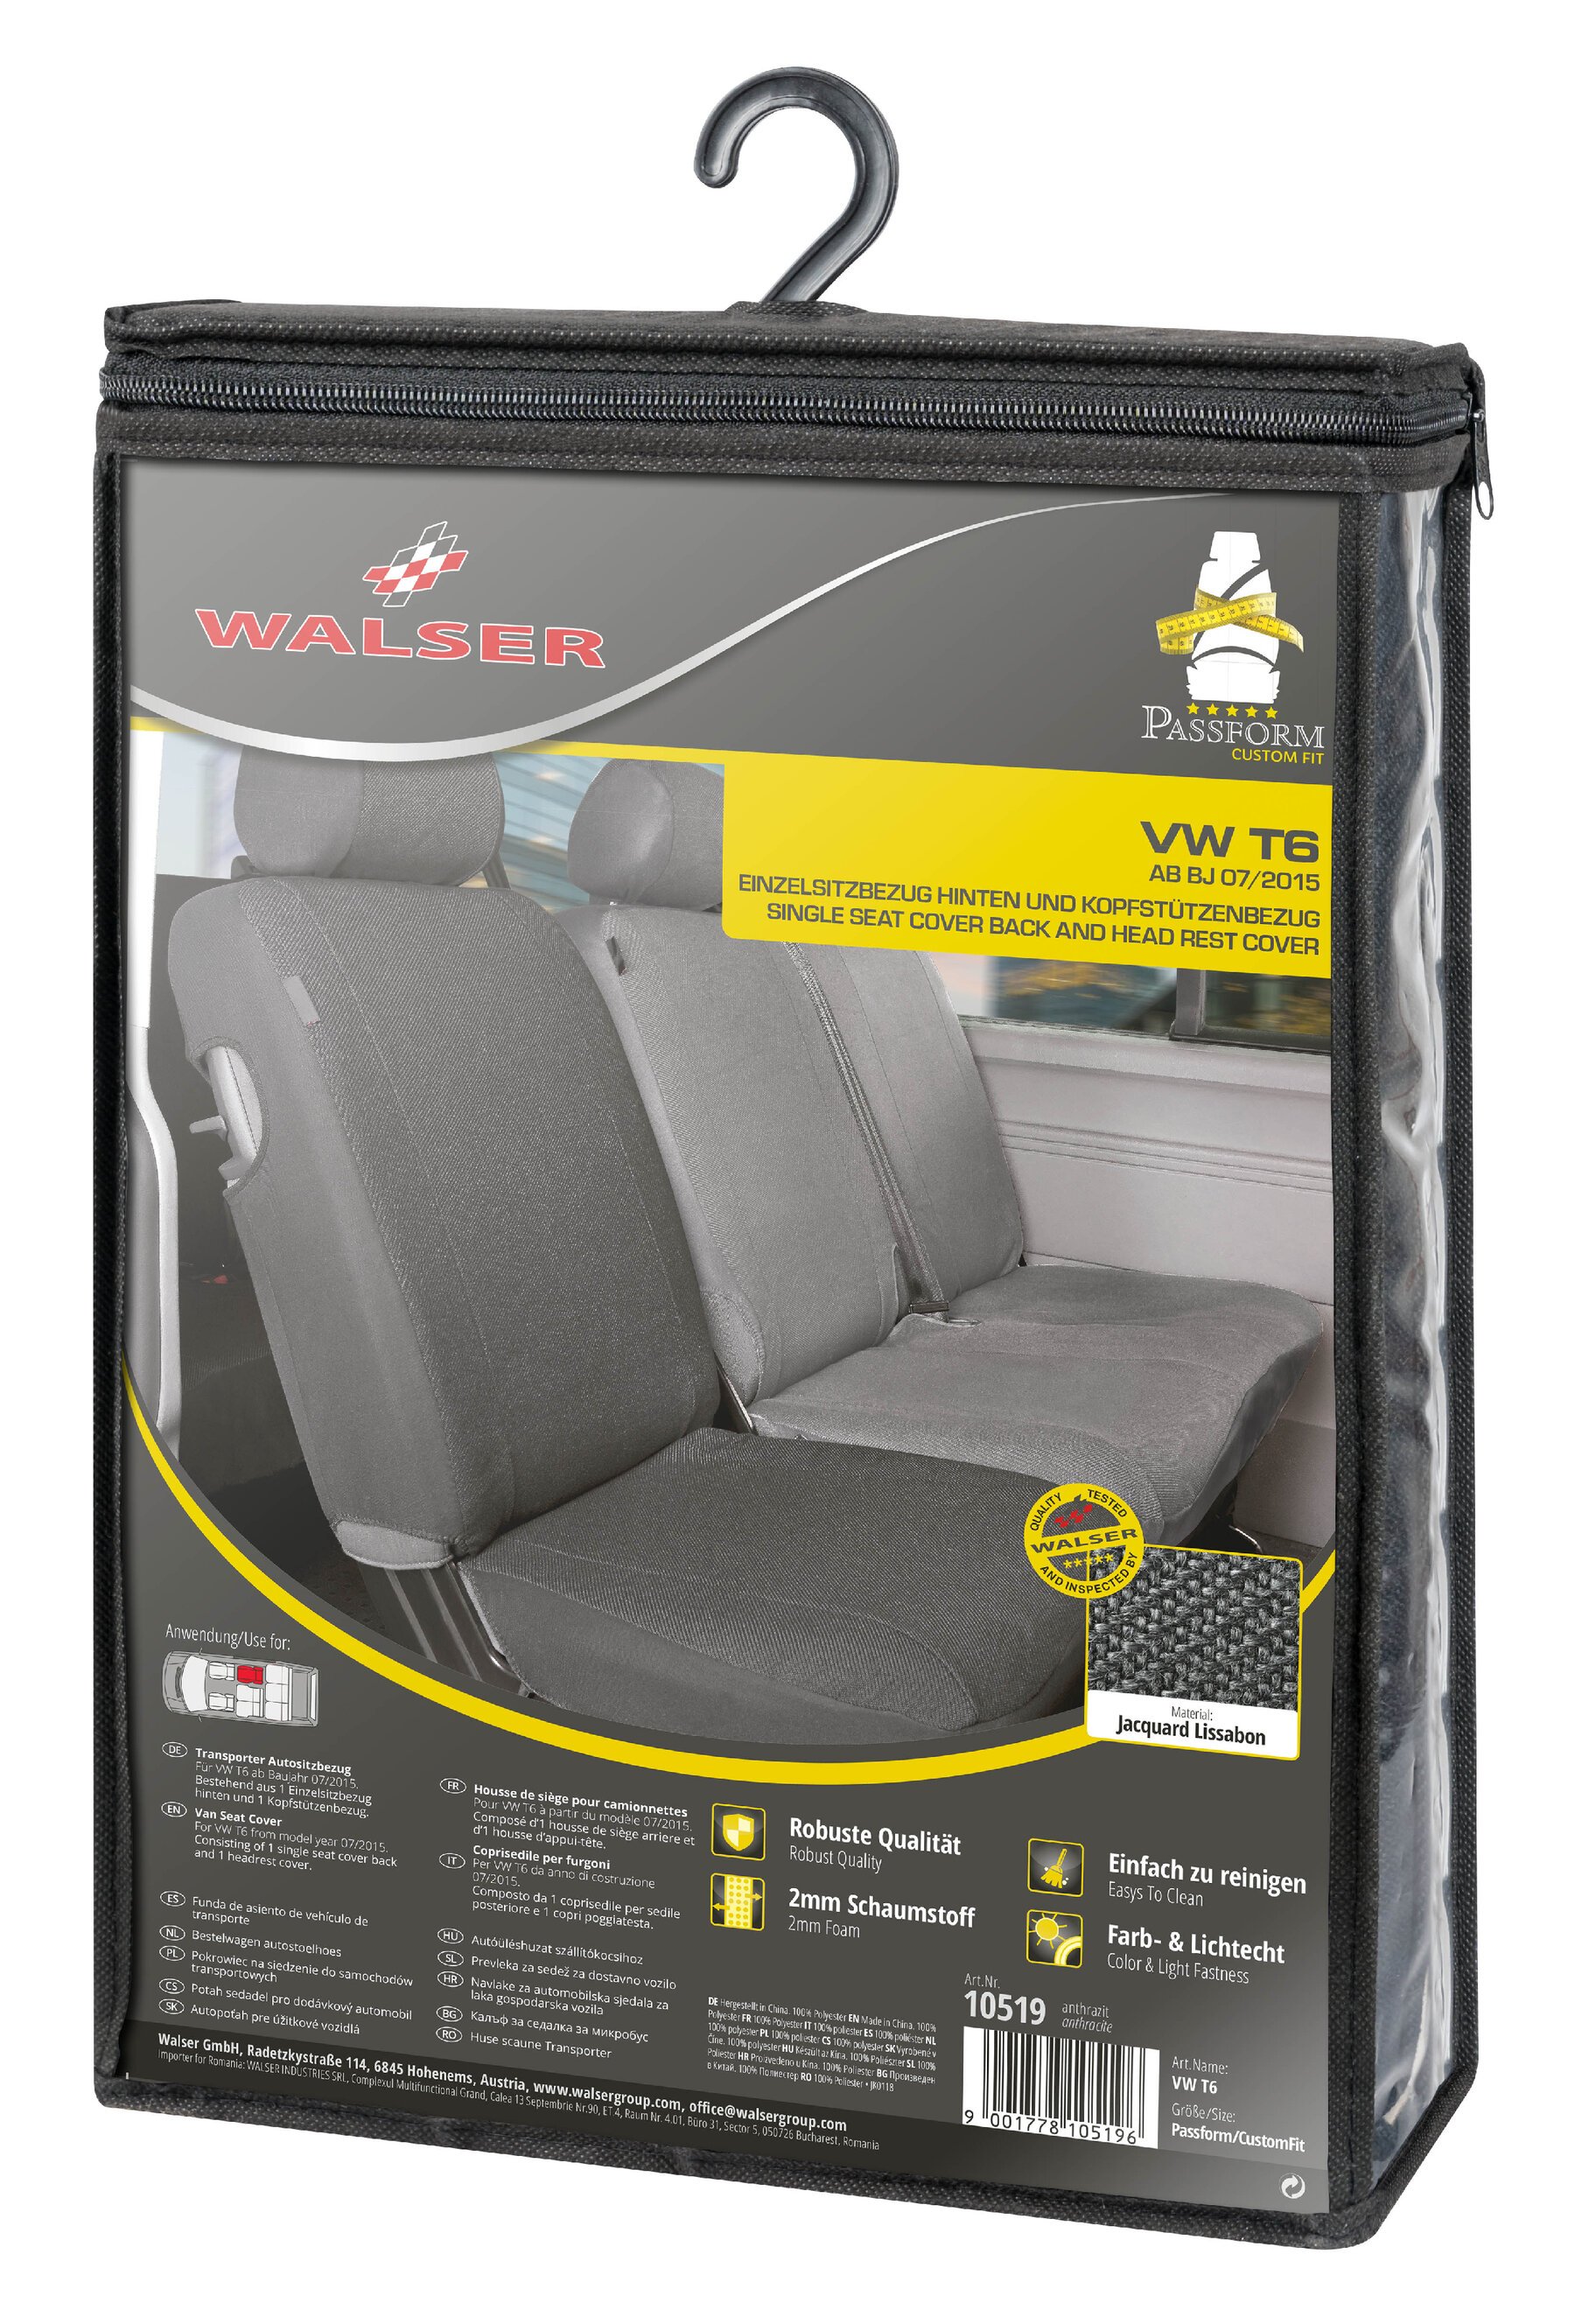 Seat cover made of fabric for VW T6, single seat cover rear